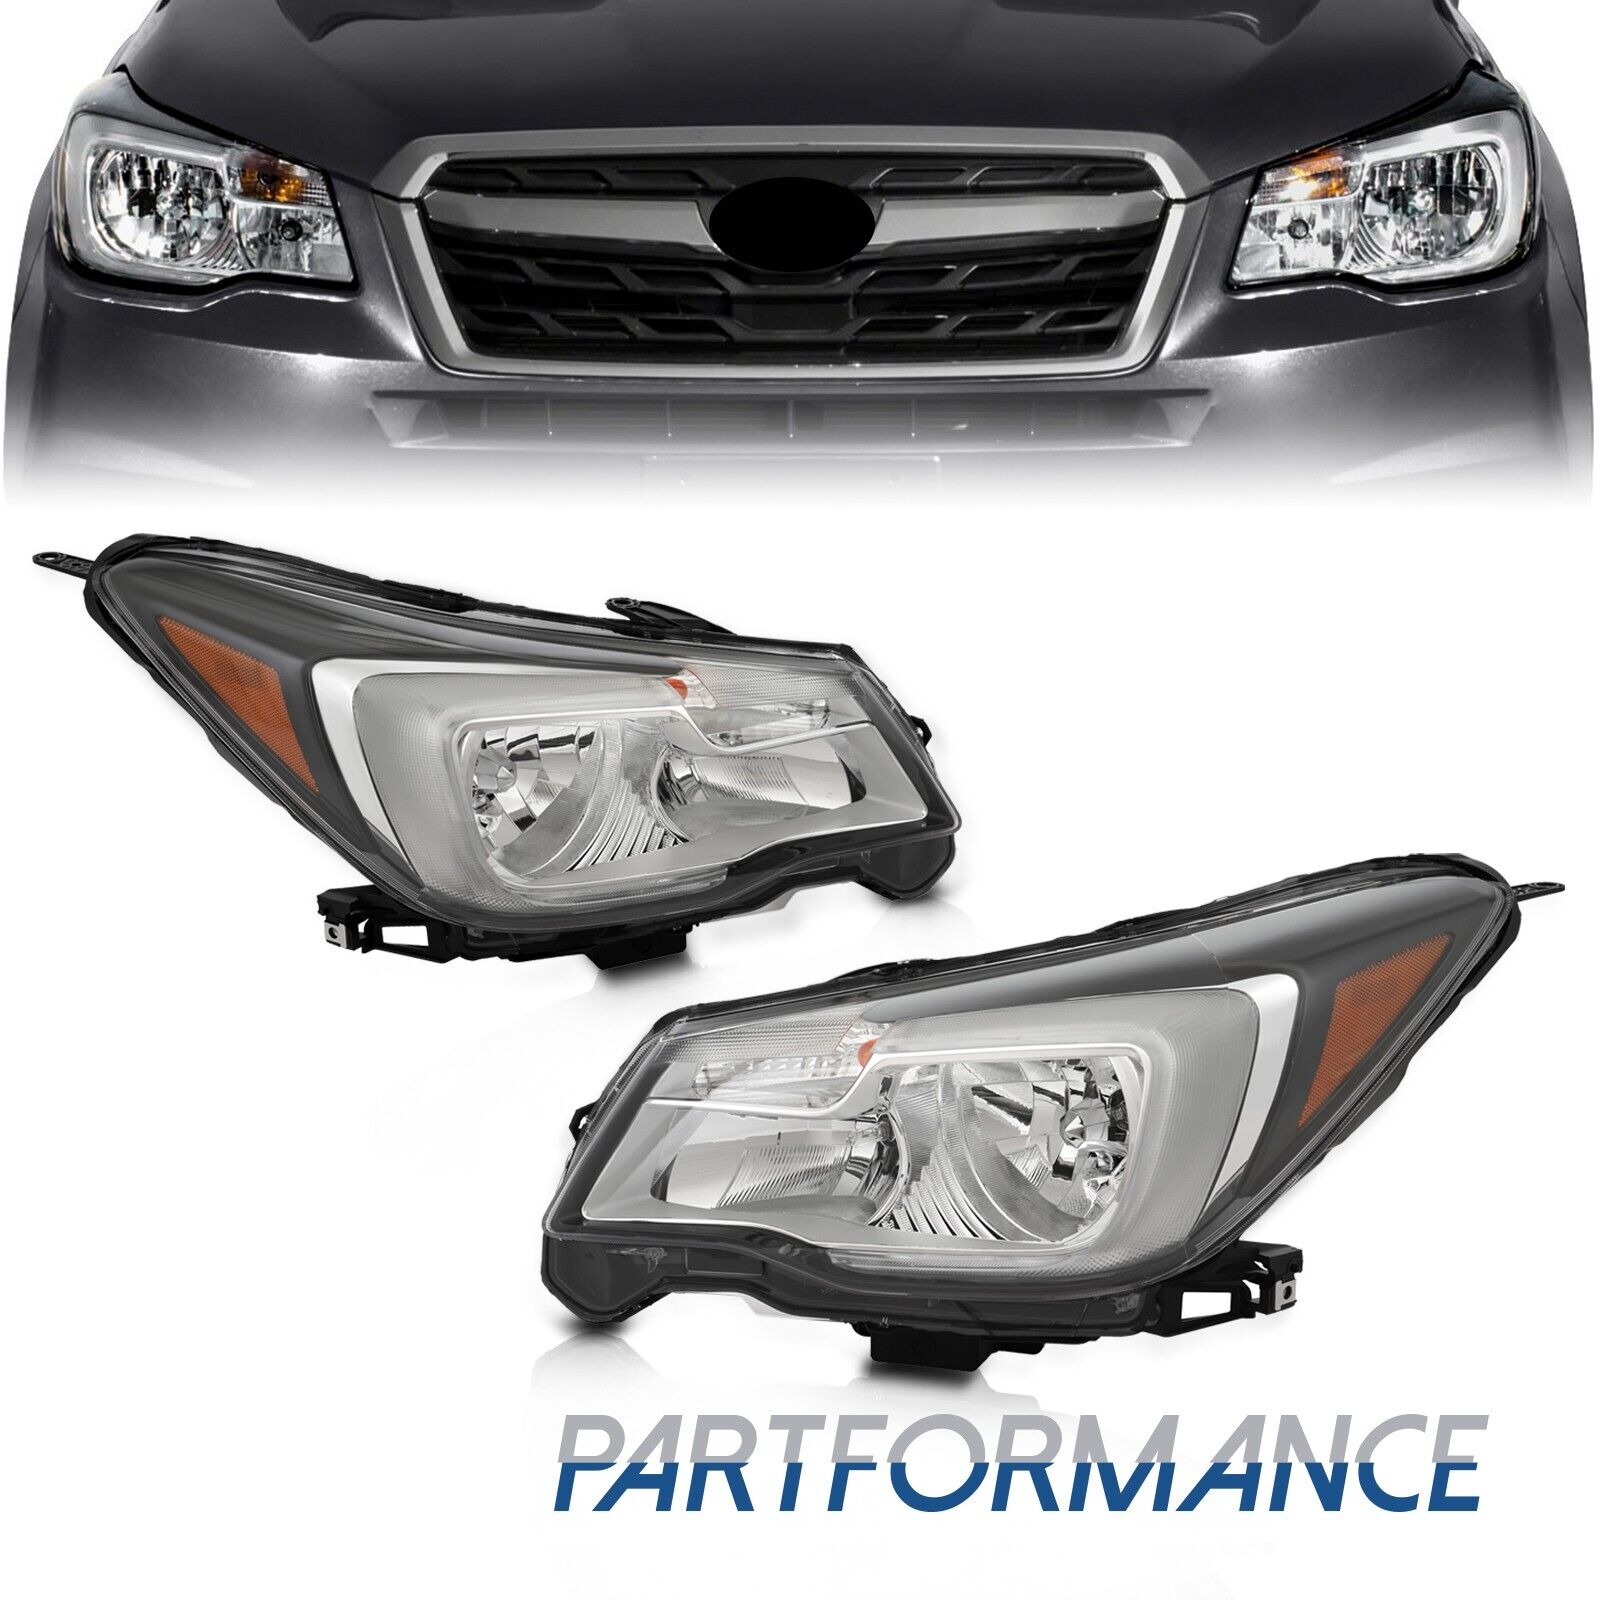 For 2017-2018 Subaru Forester Factory Halogen Headlights Left+Right Side W/Bulb